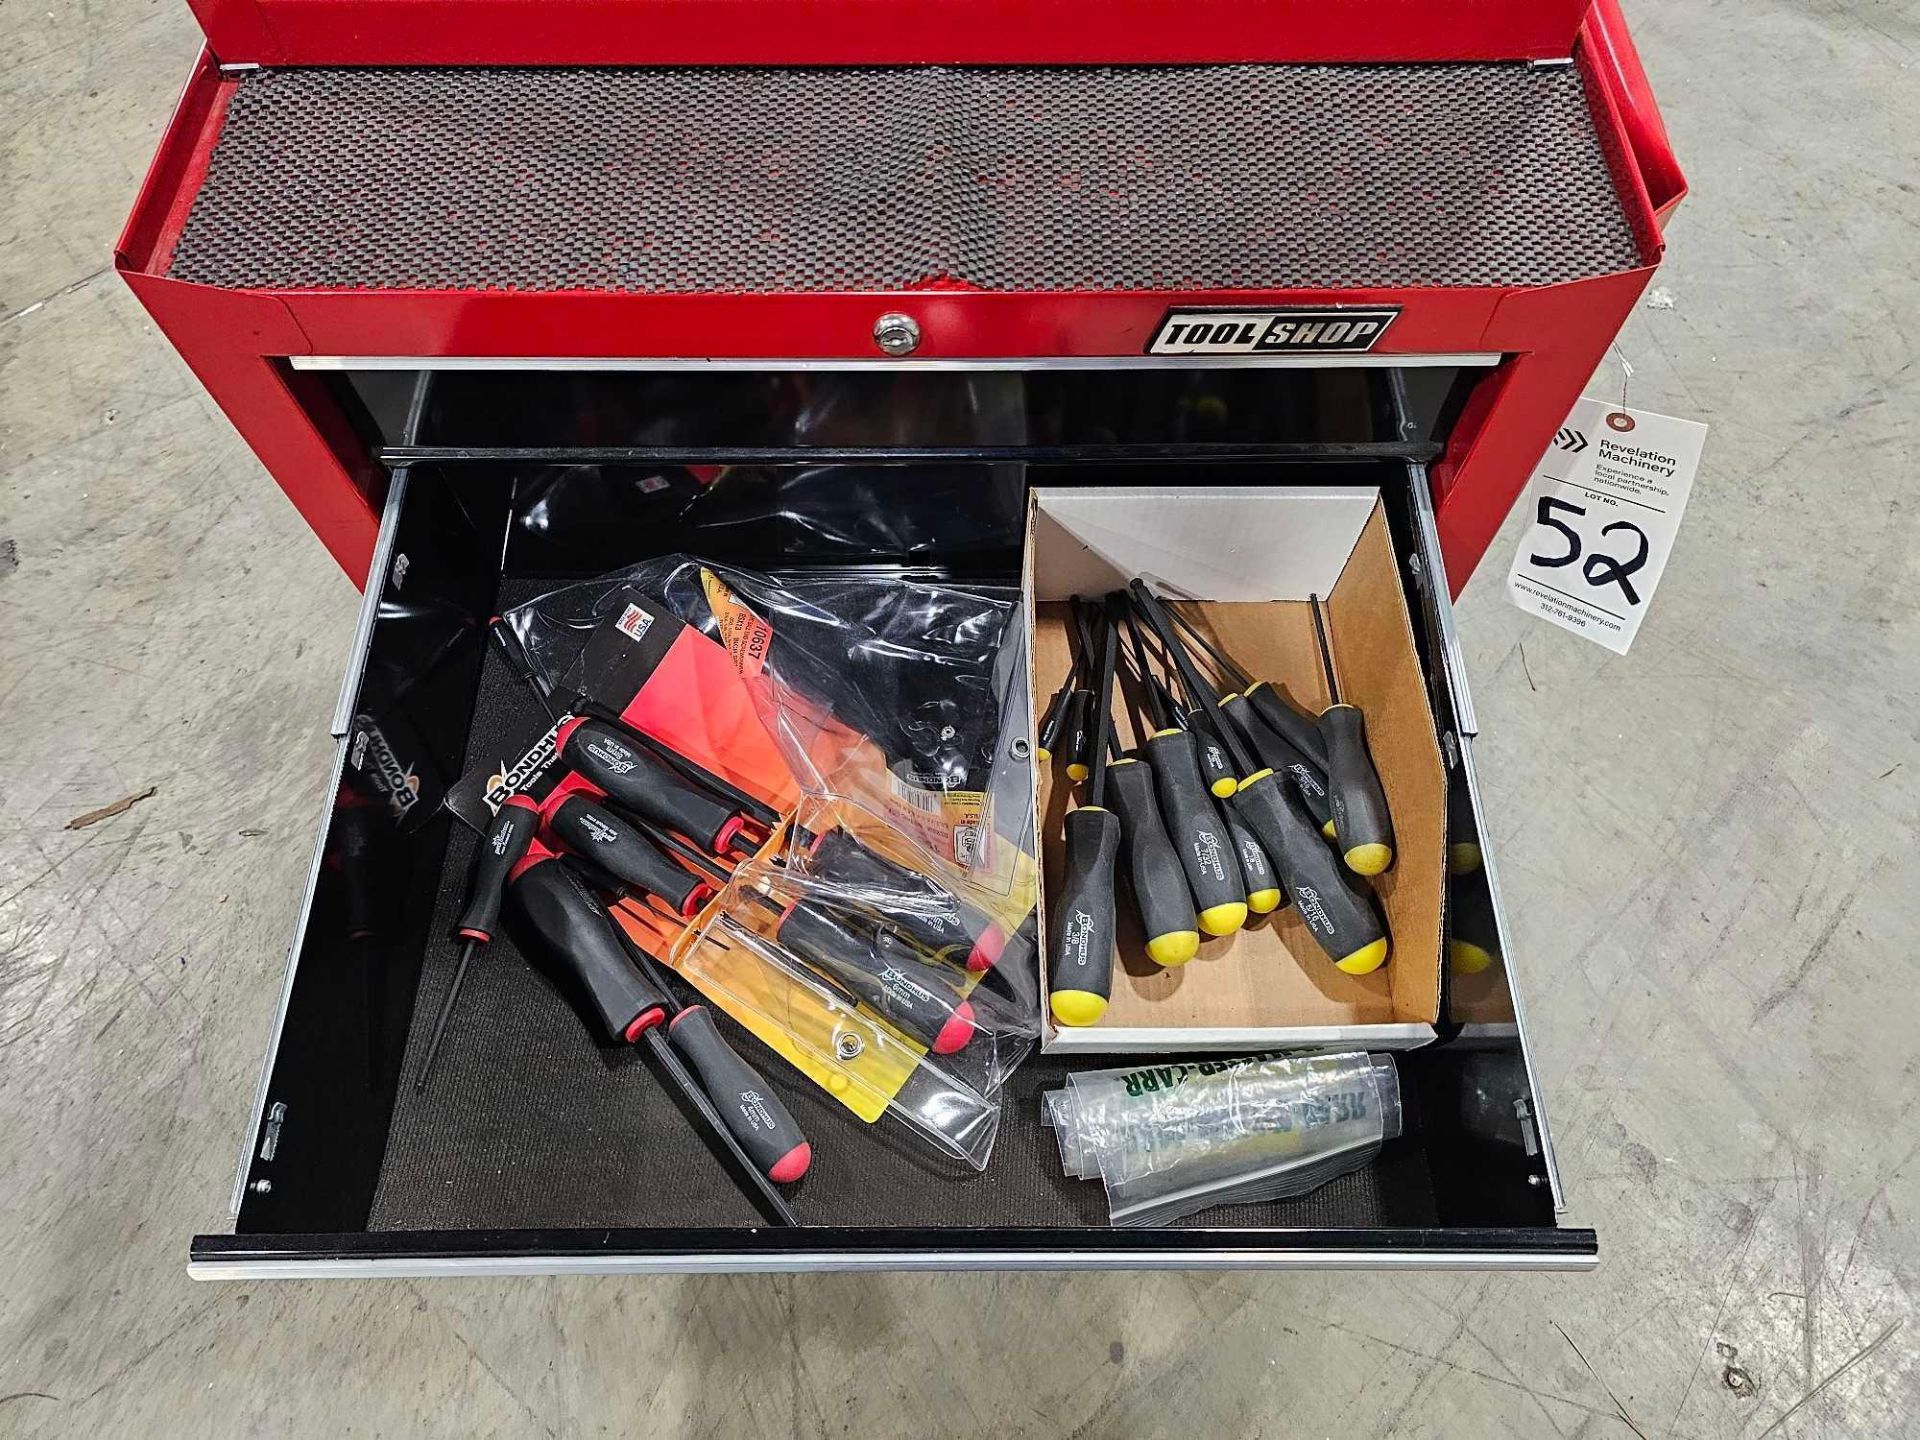 TOOL SHOP 8 DRAWER TOOL BOX LOADED WITH TOOLS - Image 14 of 17